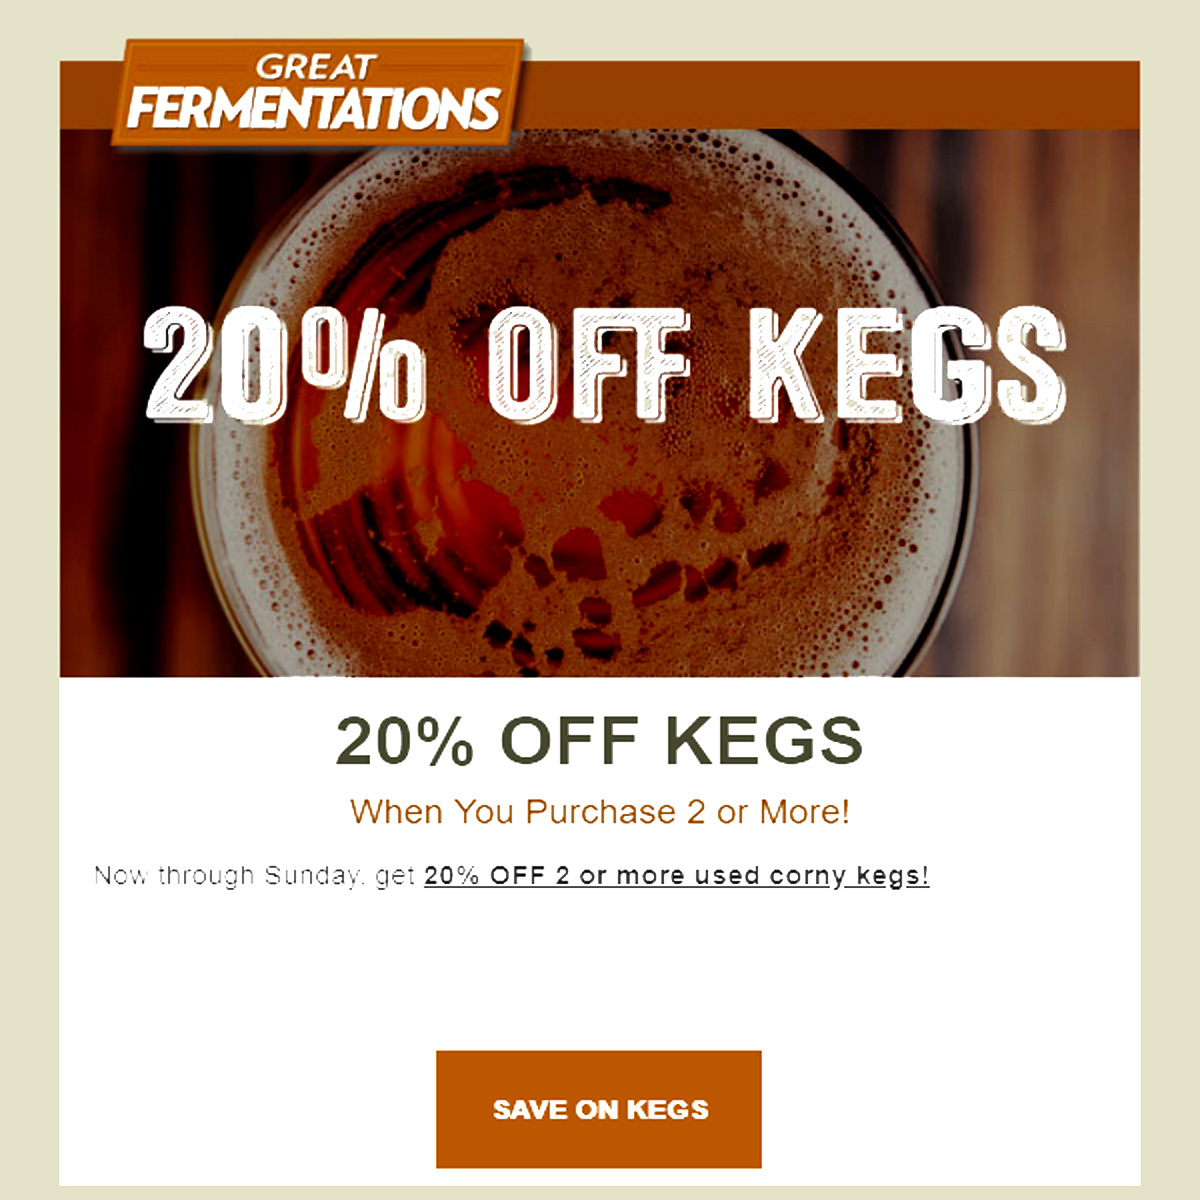 Save 20% On Home Brewing Kegs With This GreatFermentations.com Promo Code